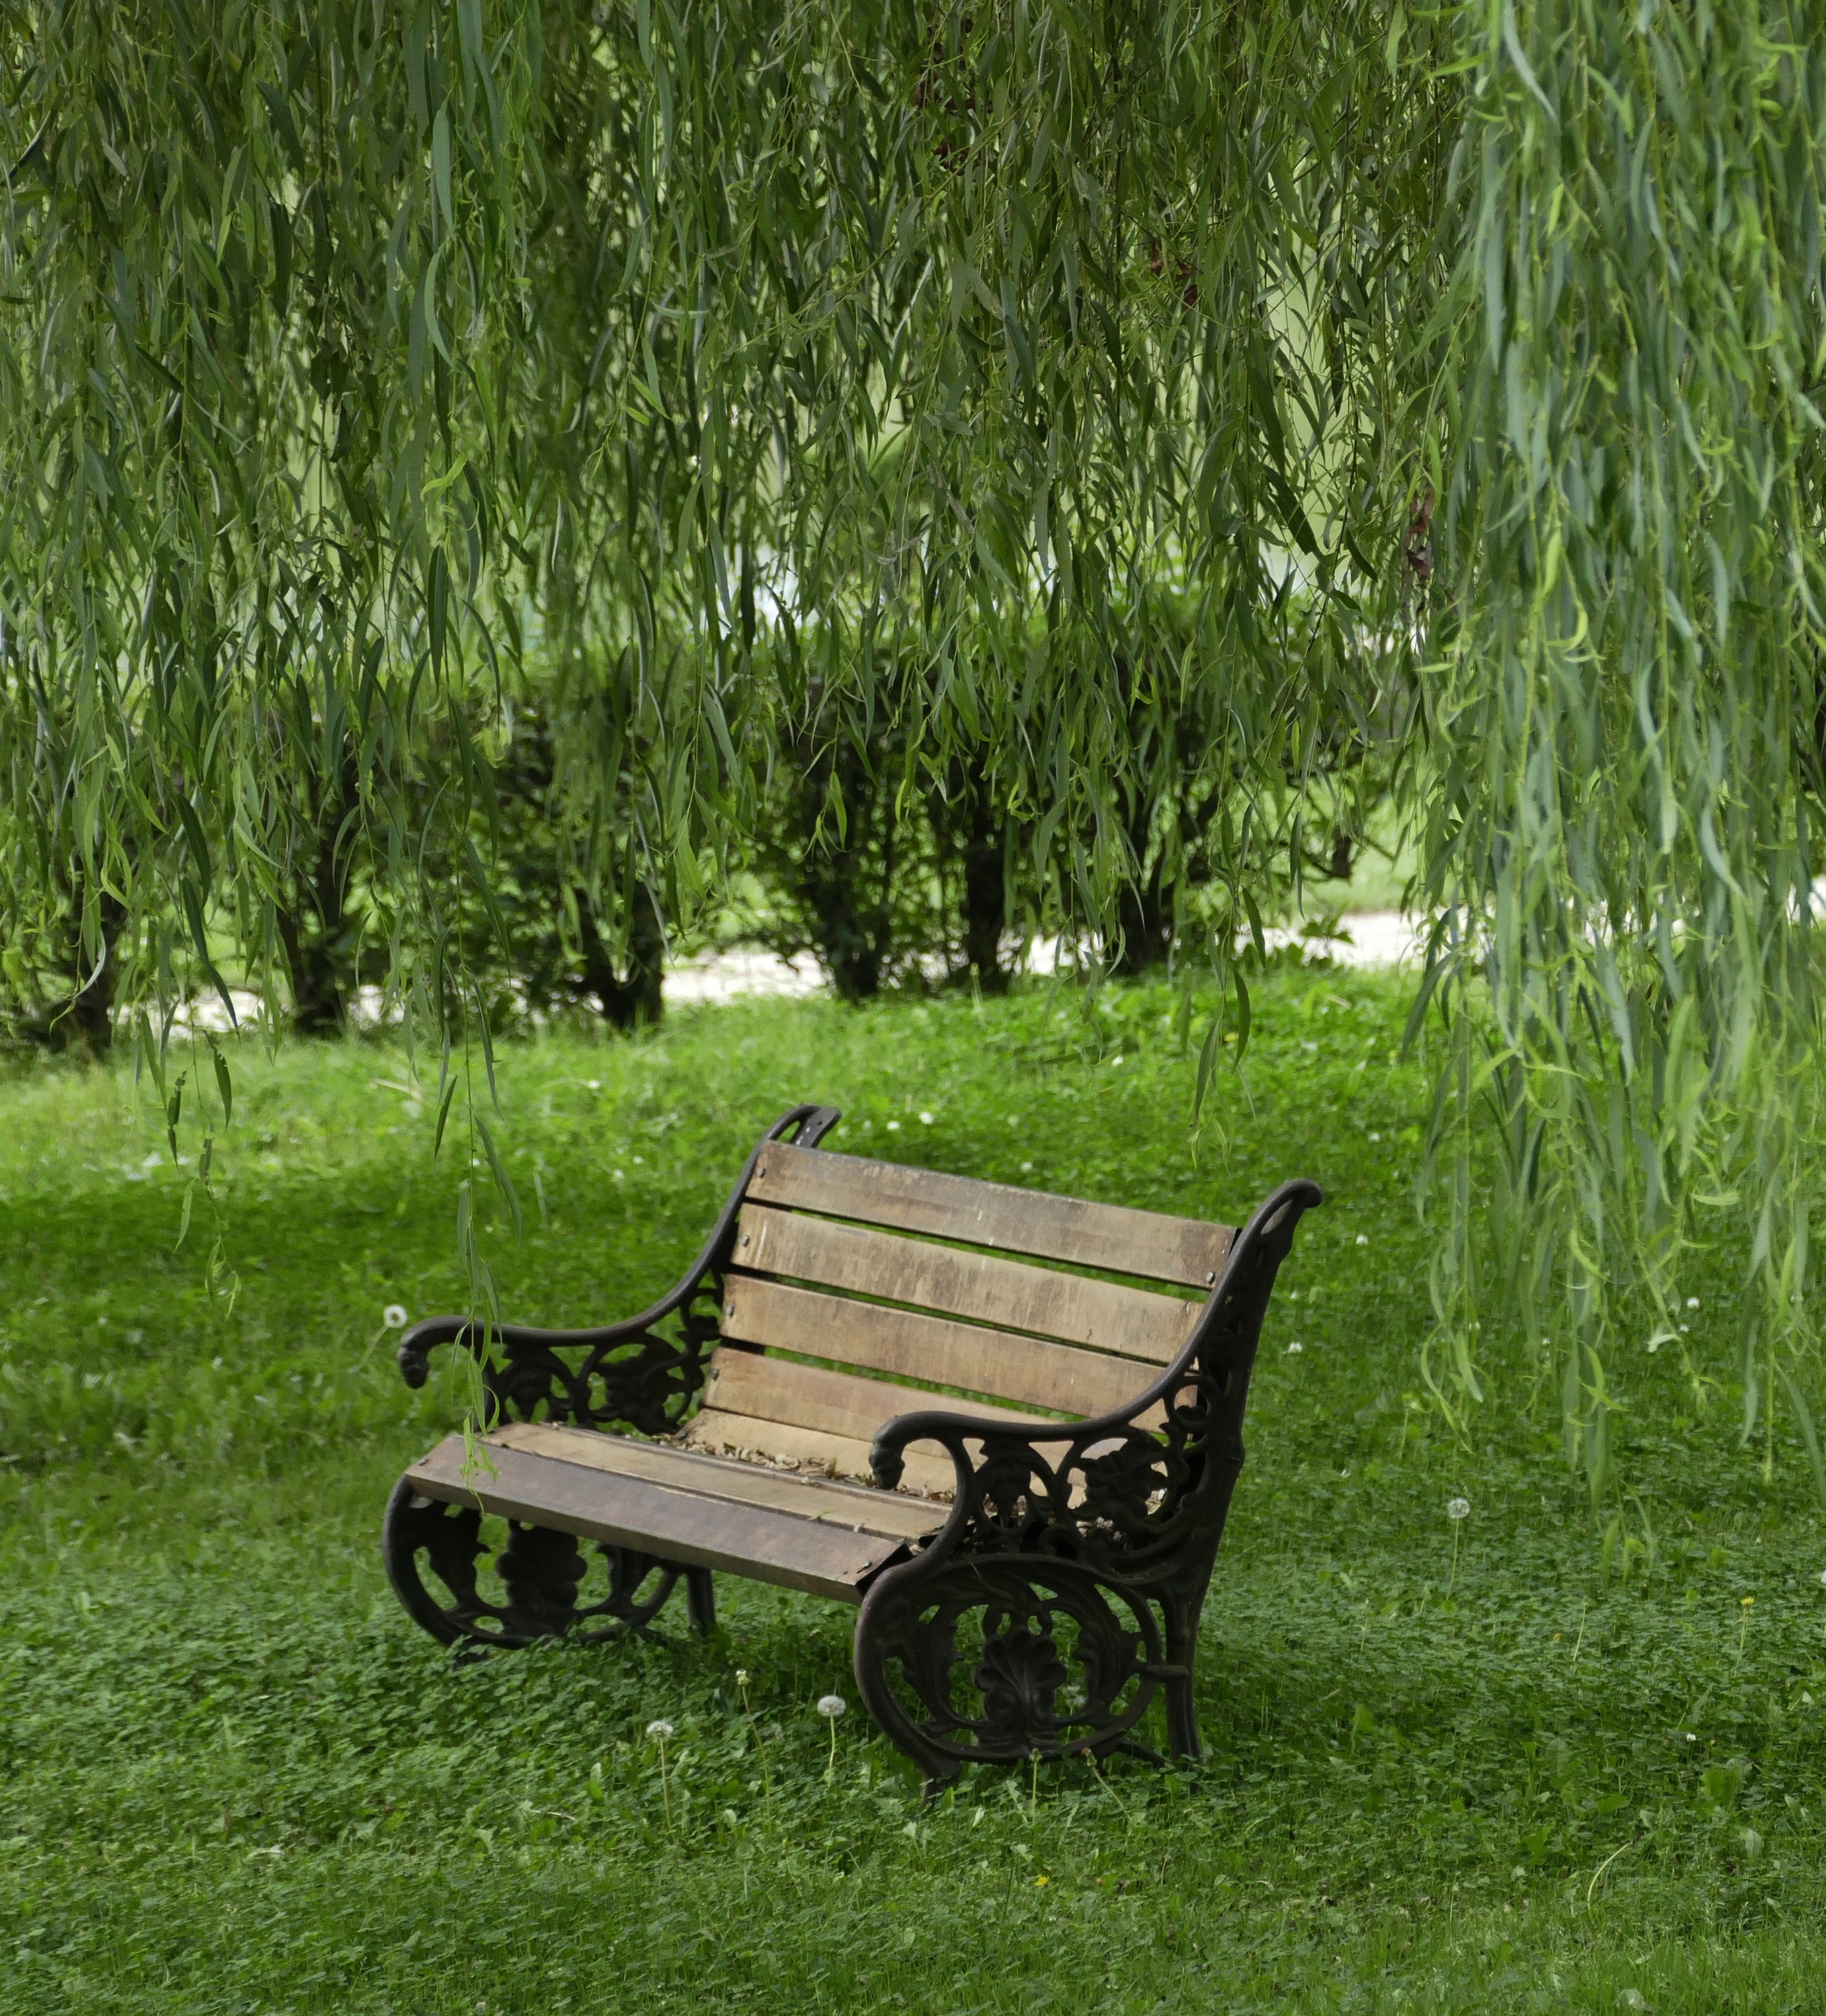 Tree, Park, Willow, Nature, Bench, green color, grass